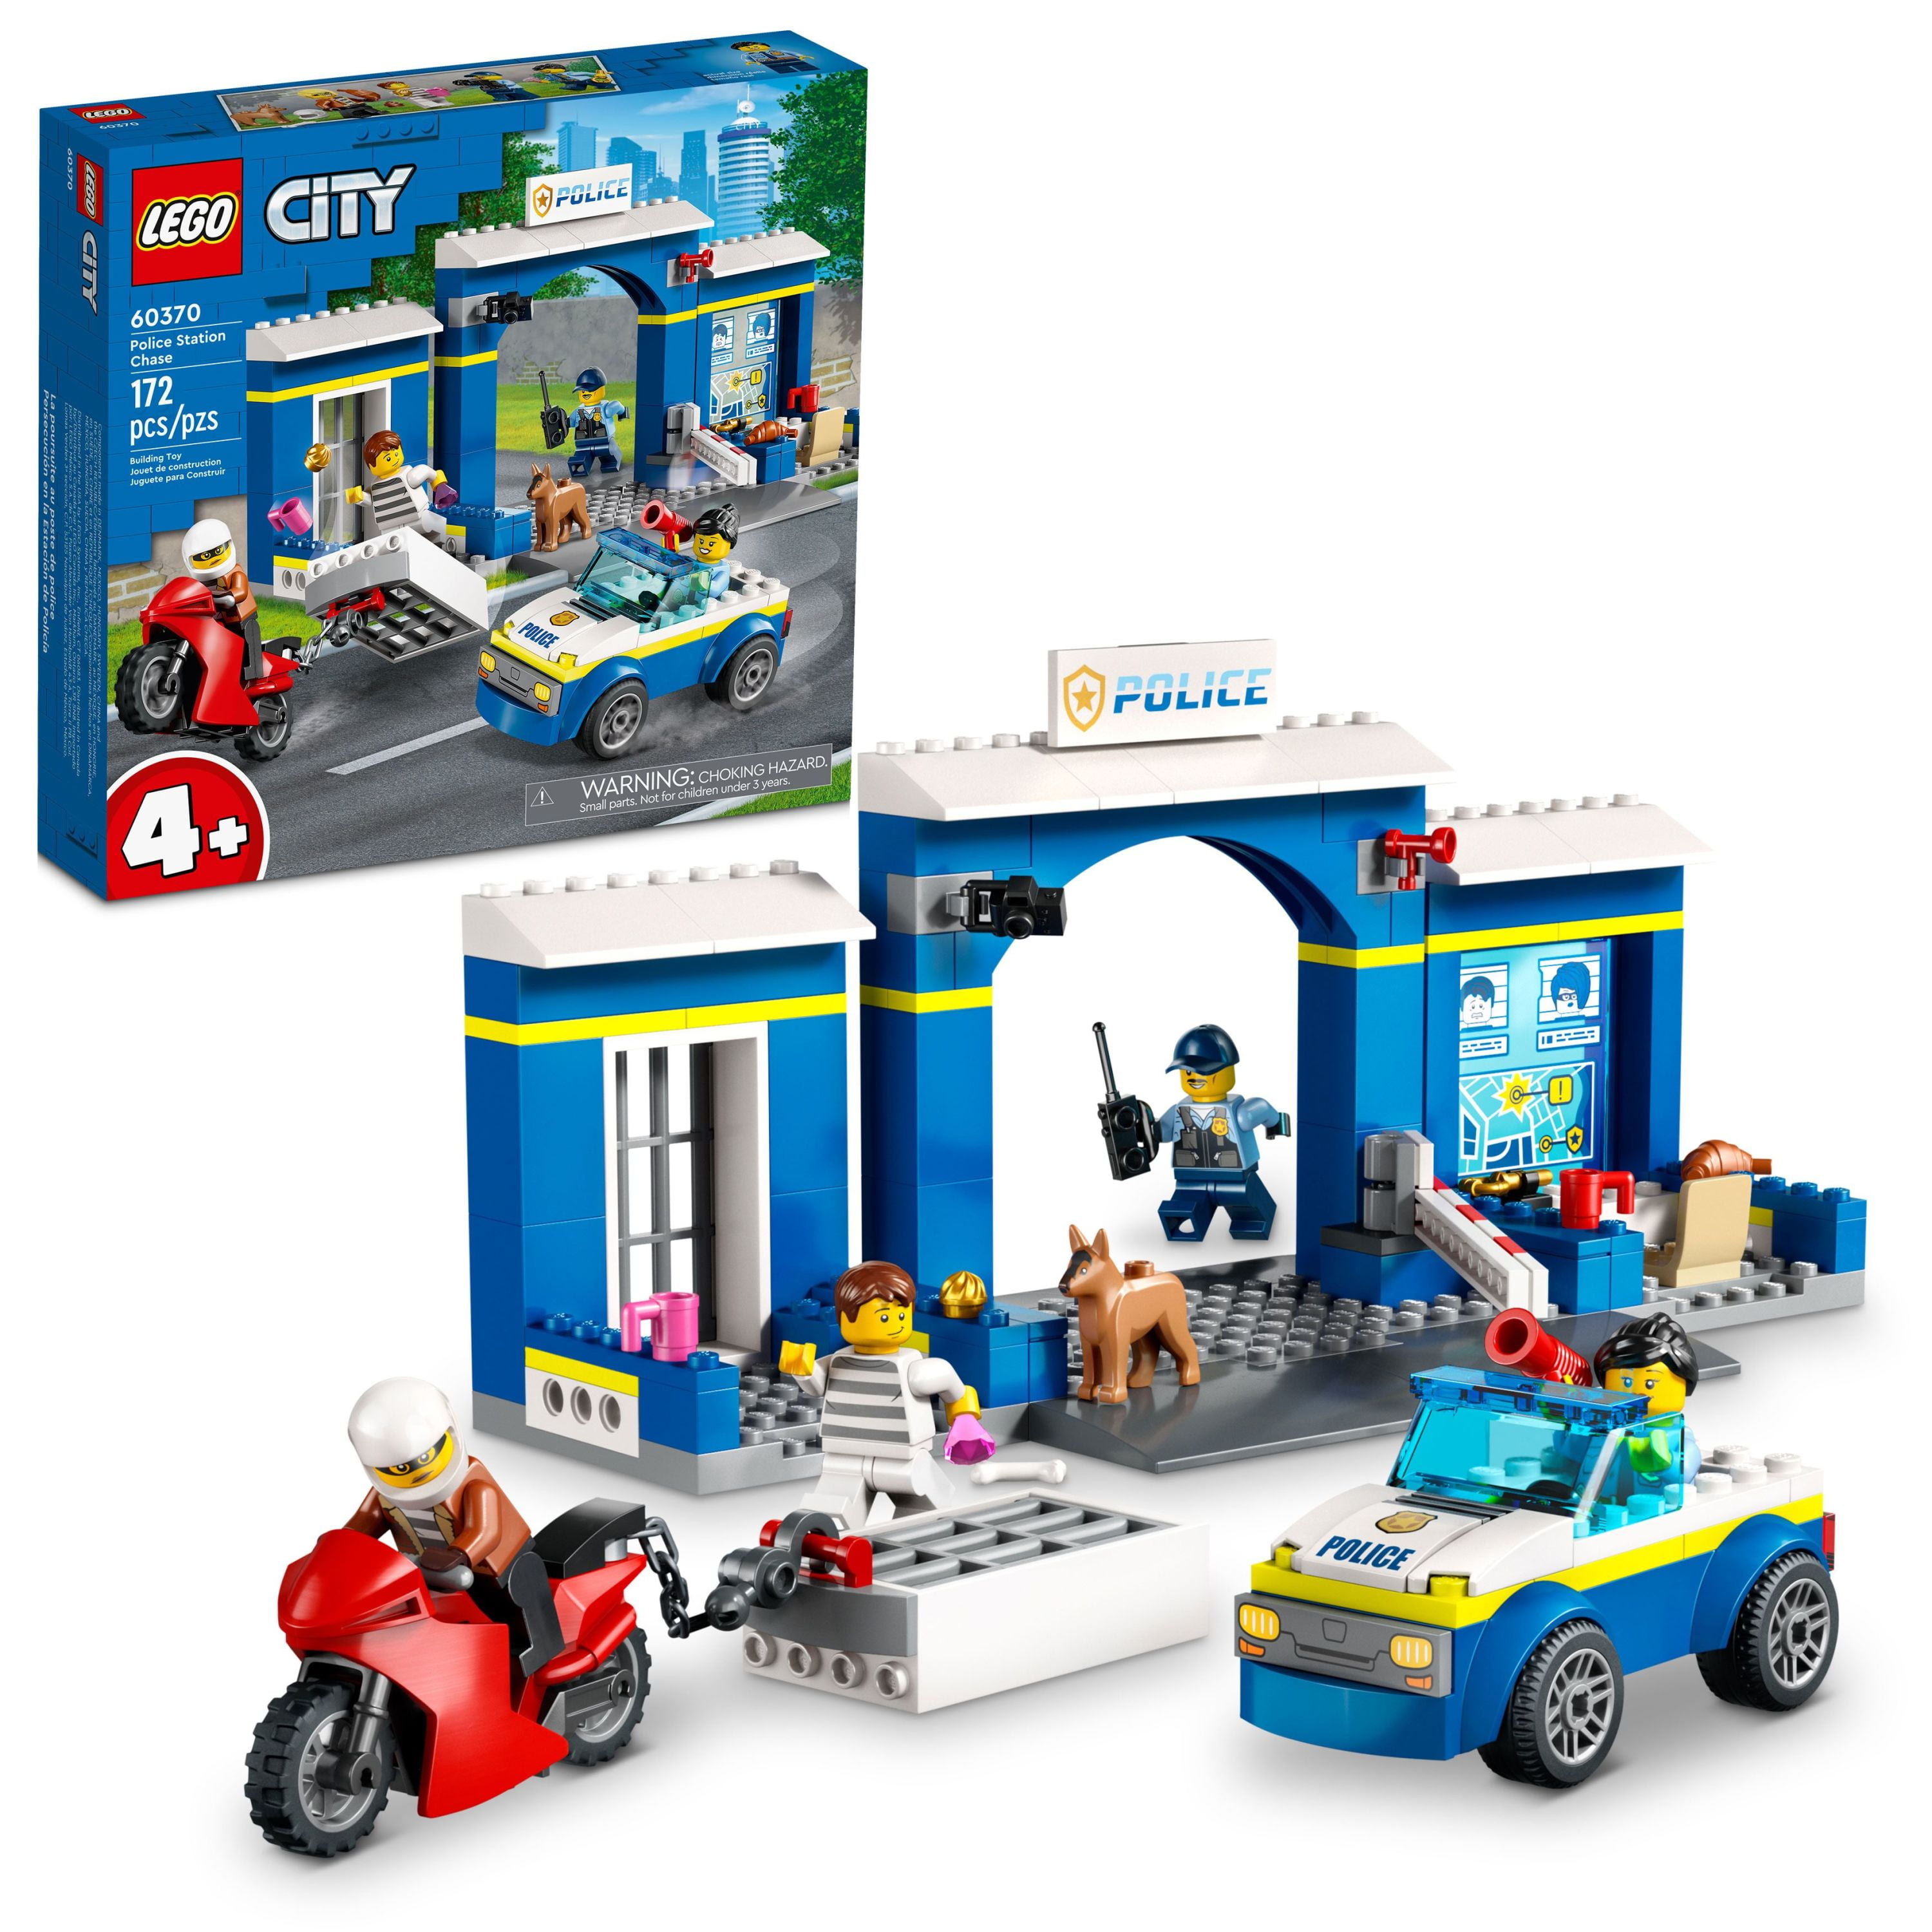 cement Spanien Guinness LEGO City Police Station Chase Set with Police Car Toy 60370 - Walmart.com